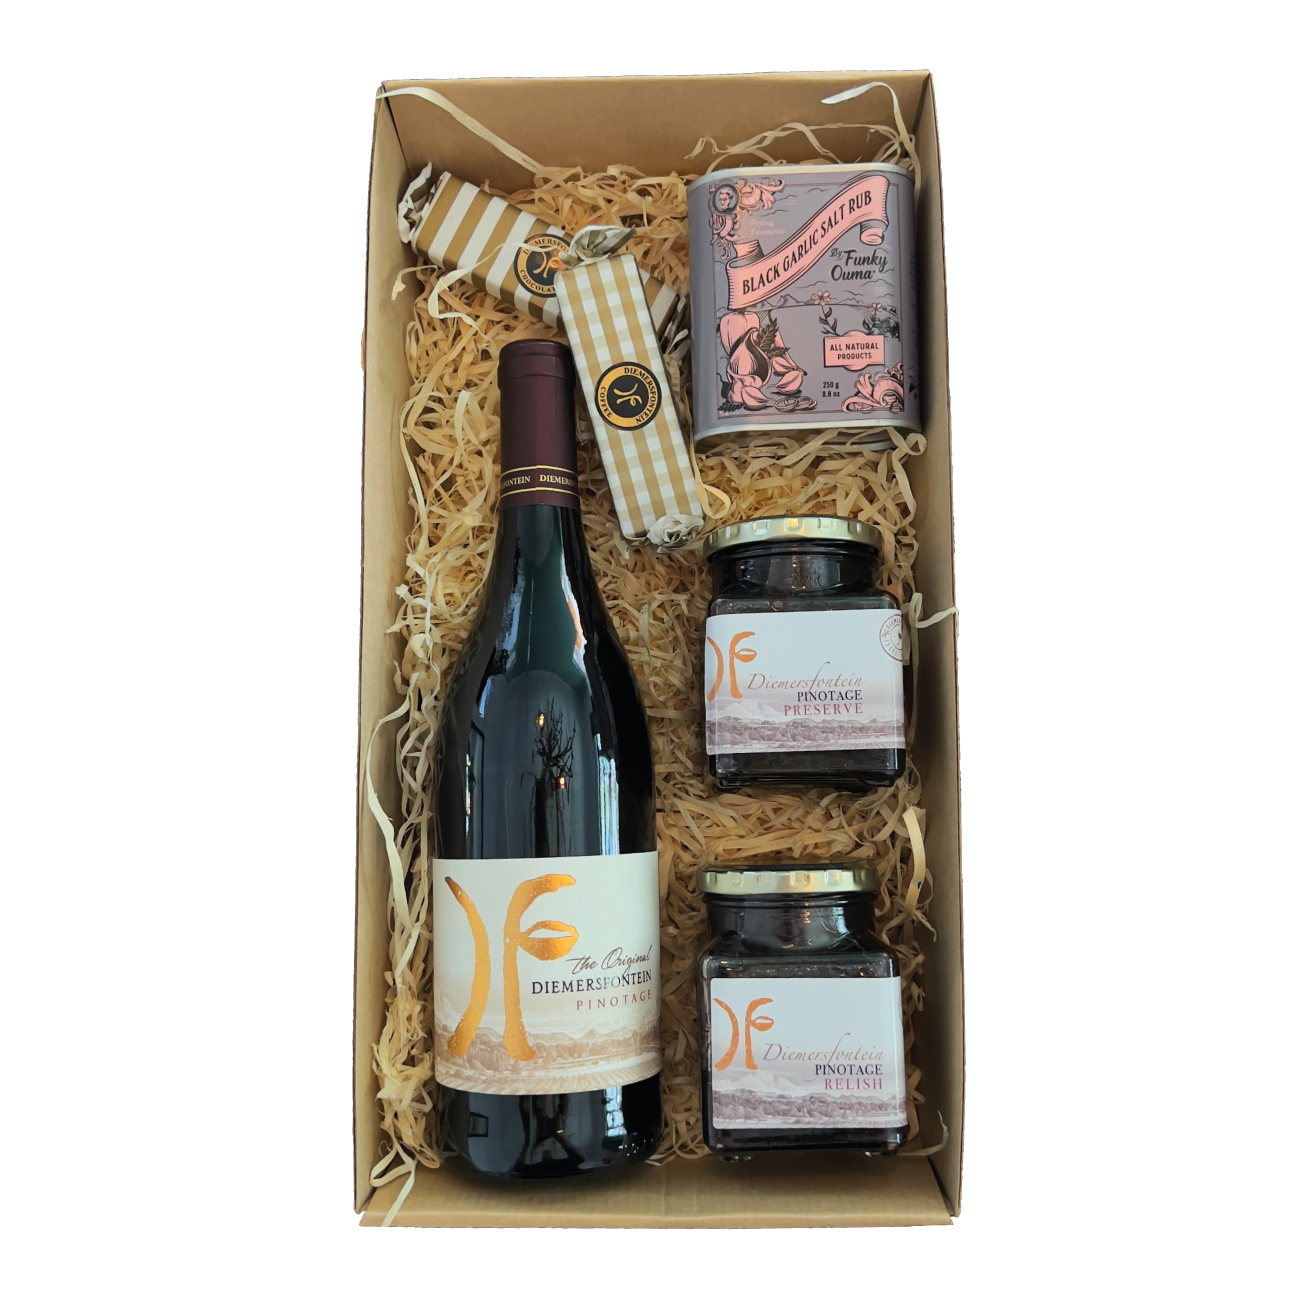 Featured image for “PINOTAGE BOX”